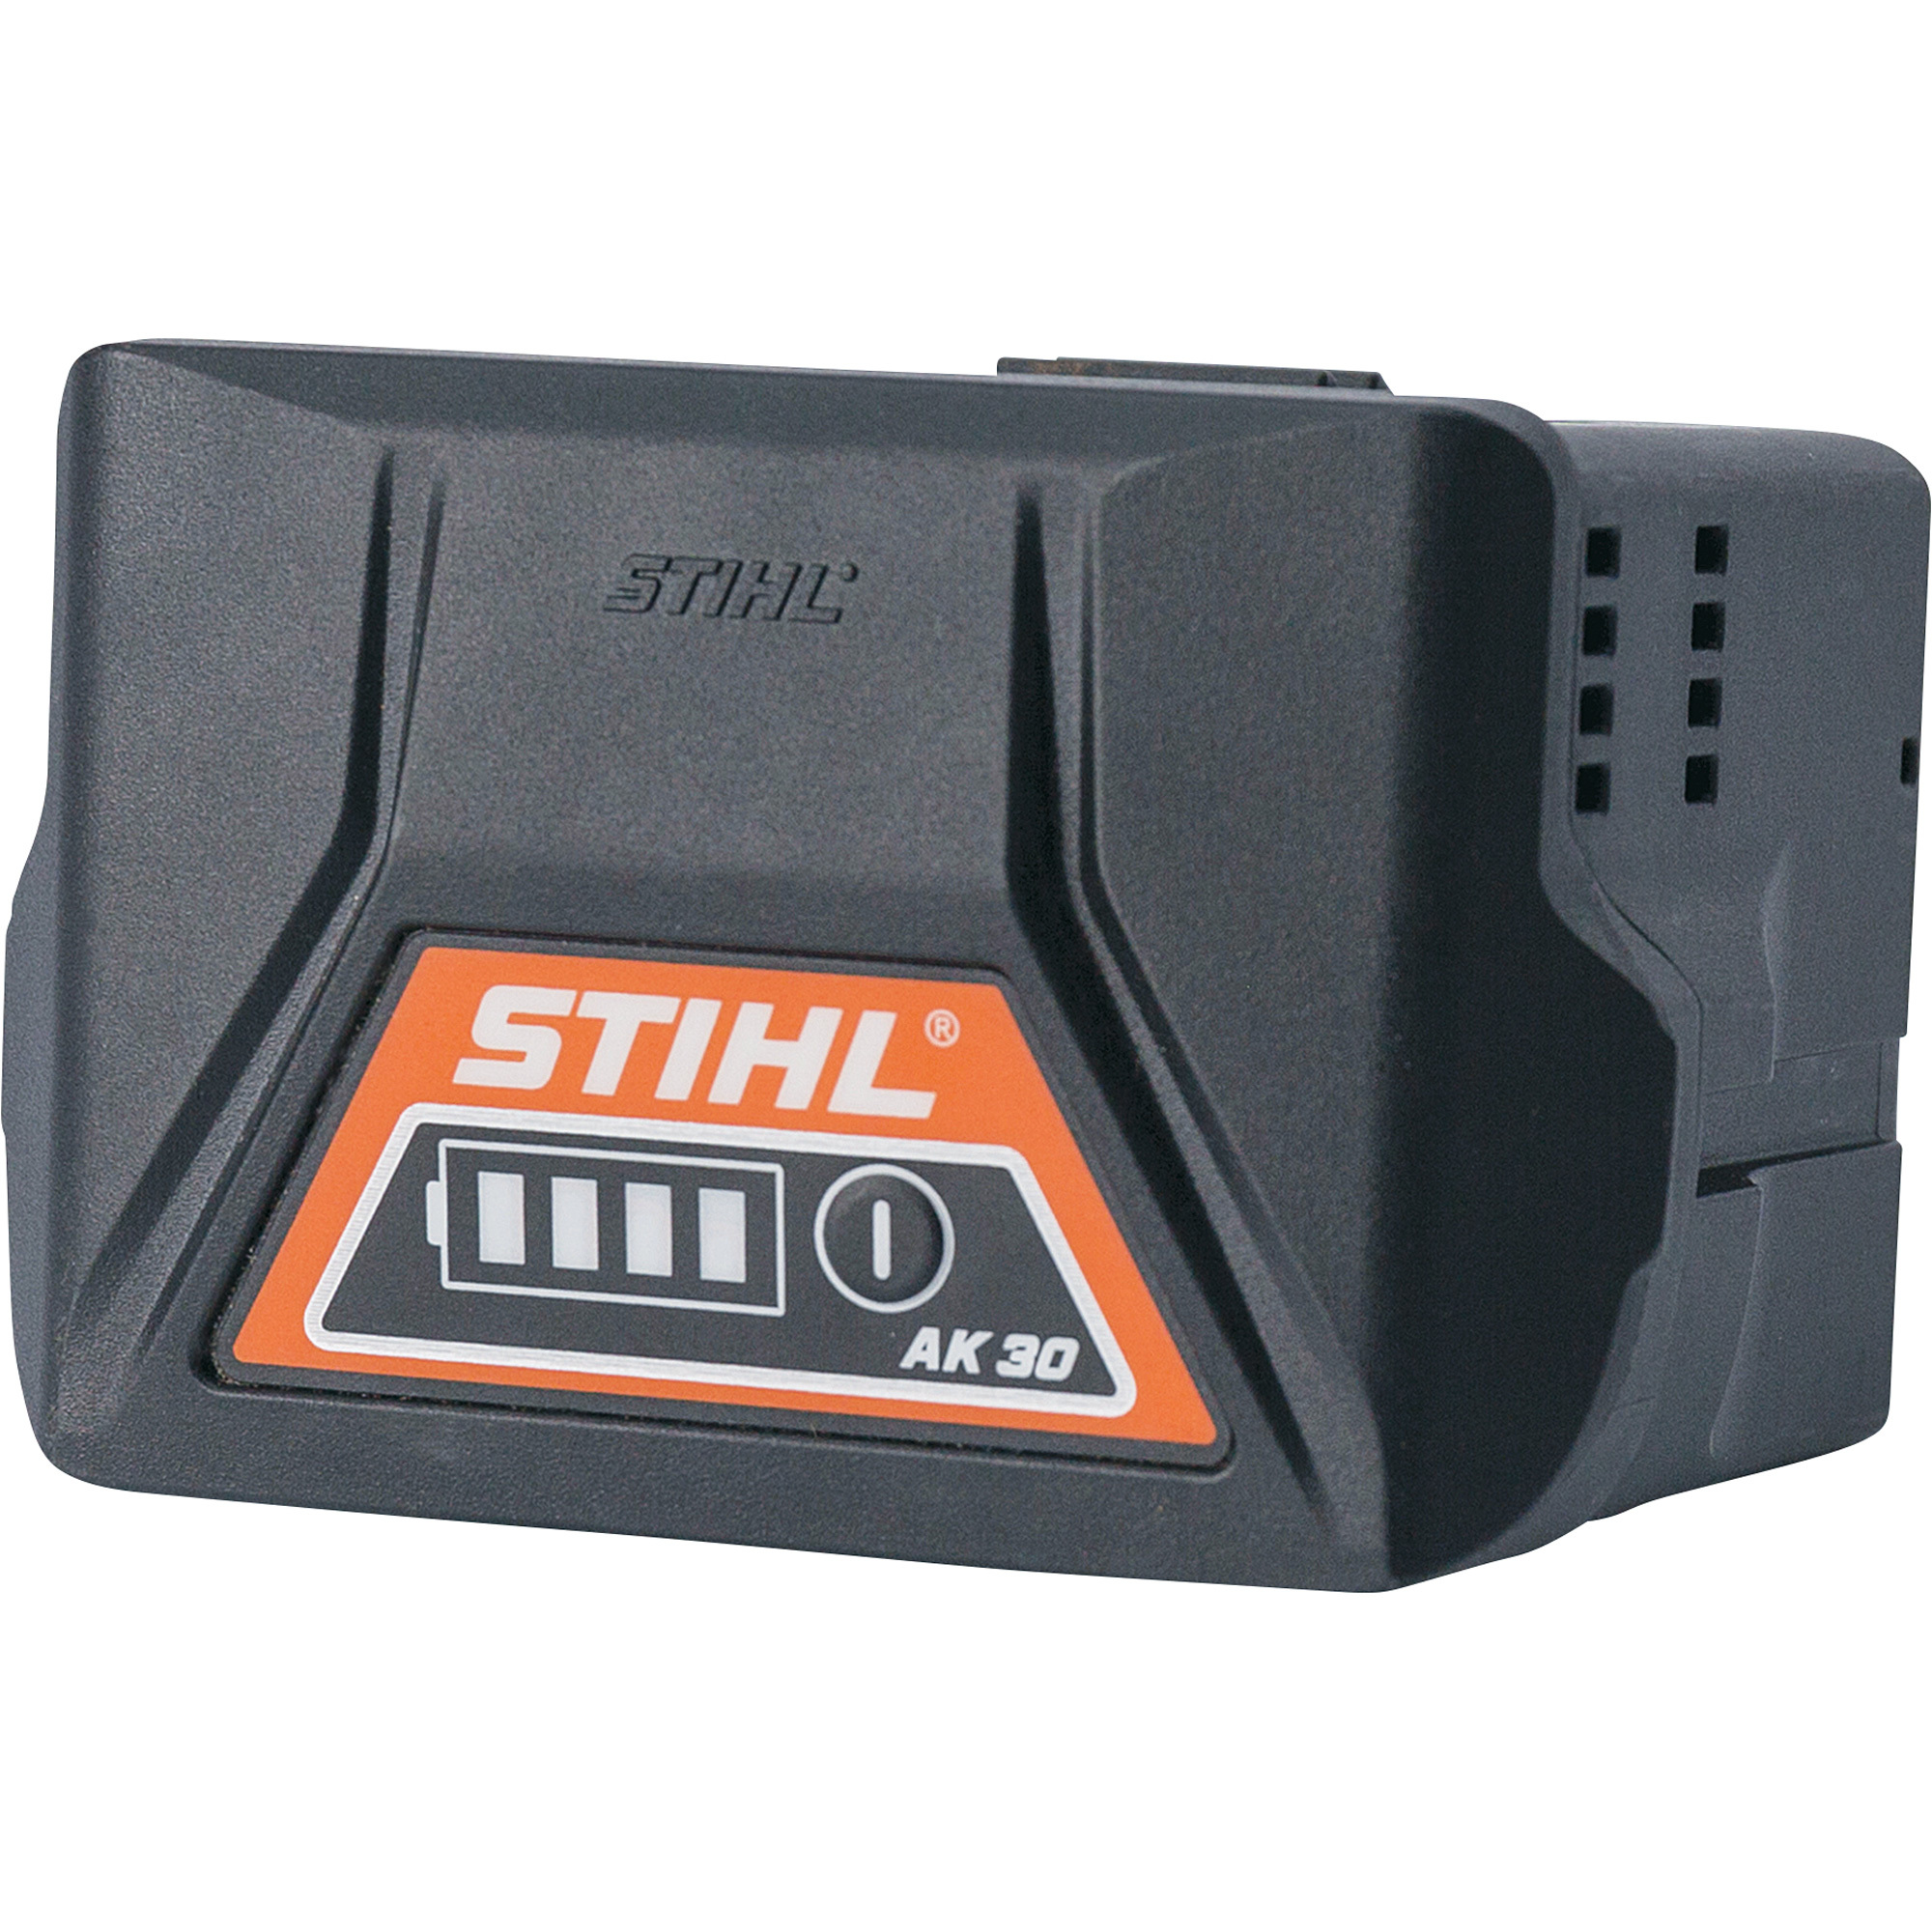 Stihl Battery-Operated AK Series Lithium-Ion Battery — 36V, 4.8 Ah, Model AK 30 -  4520 400 6513